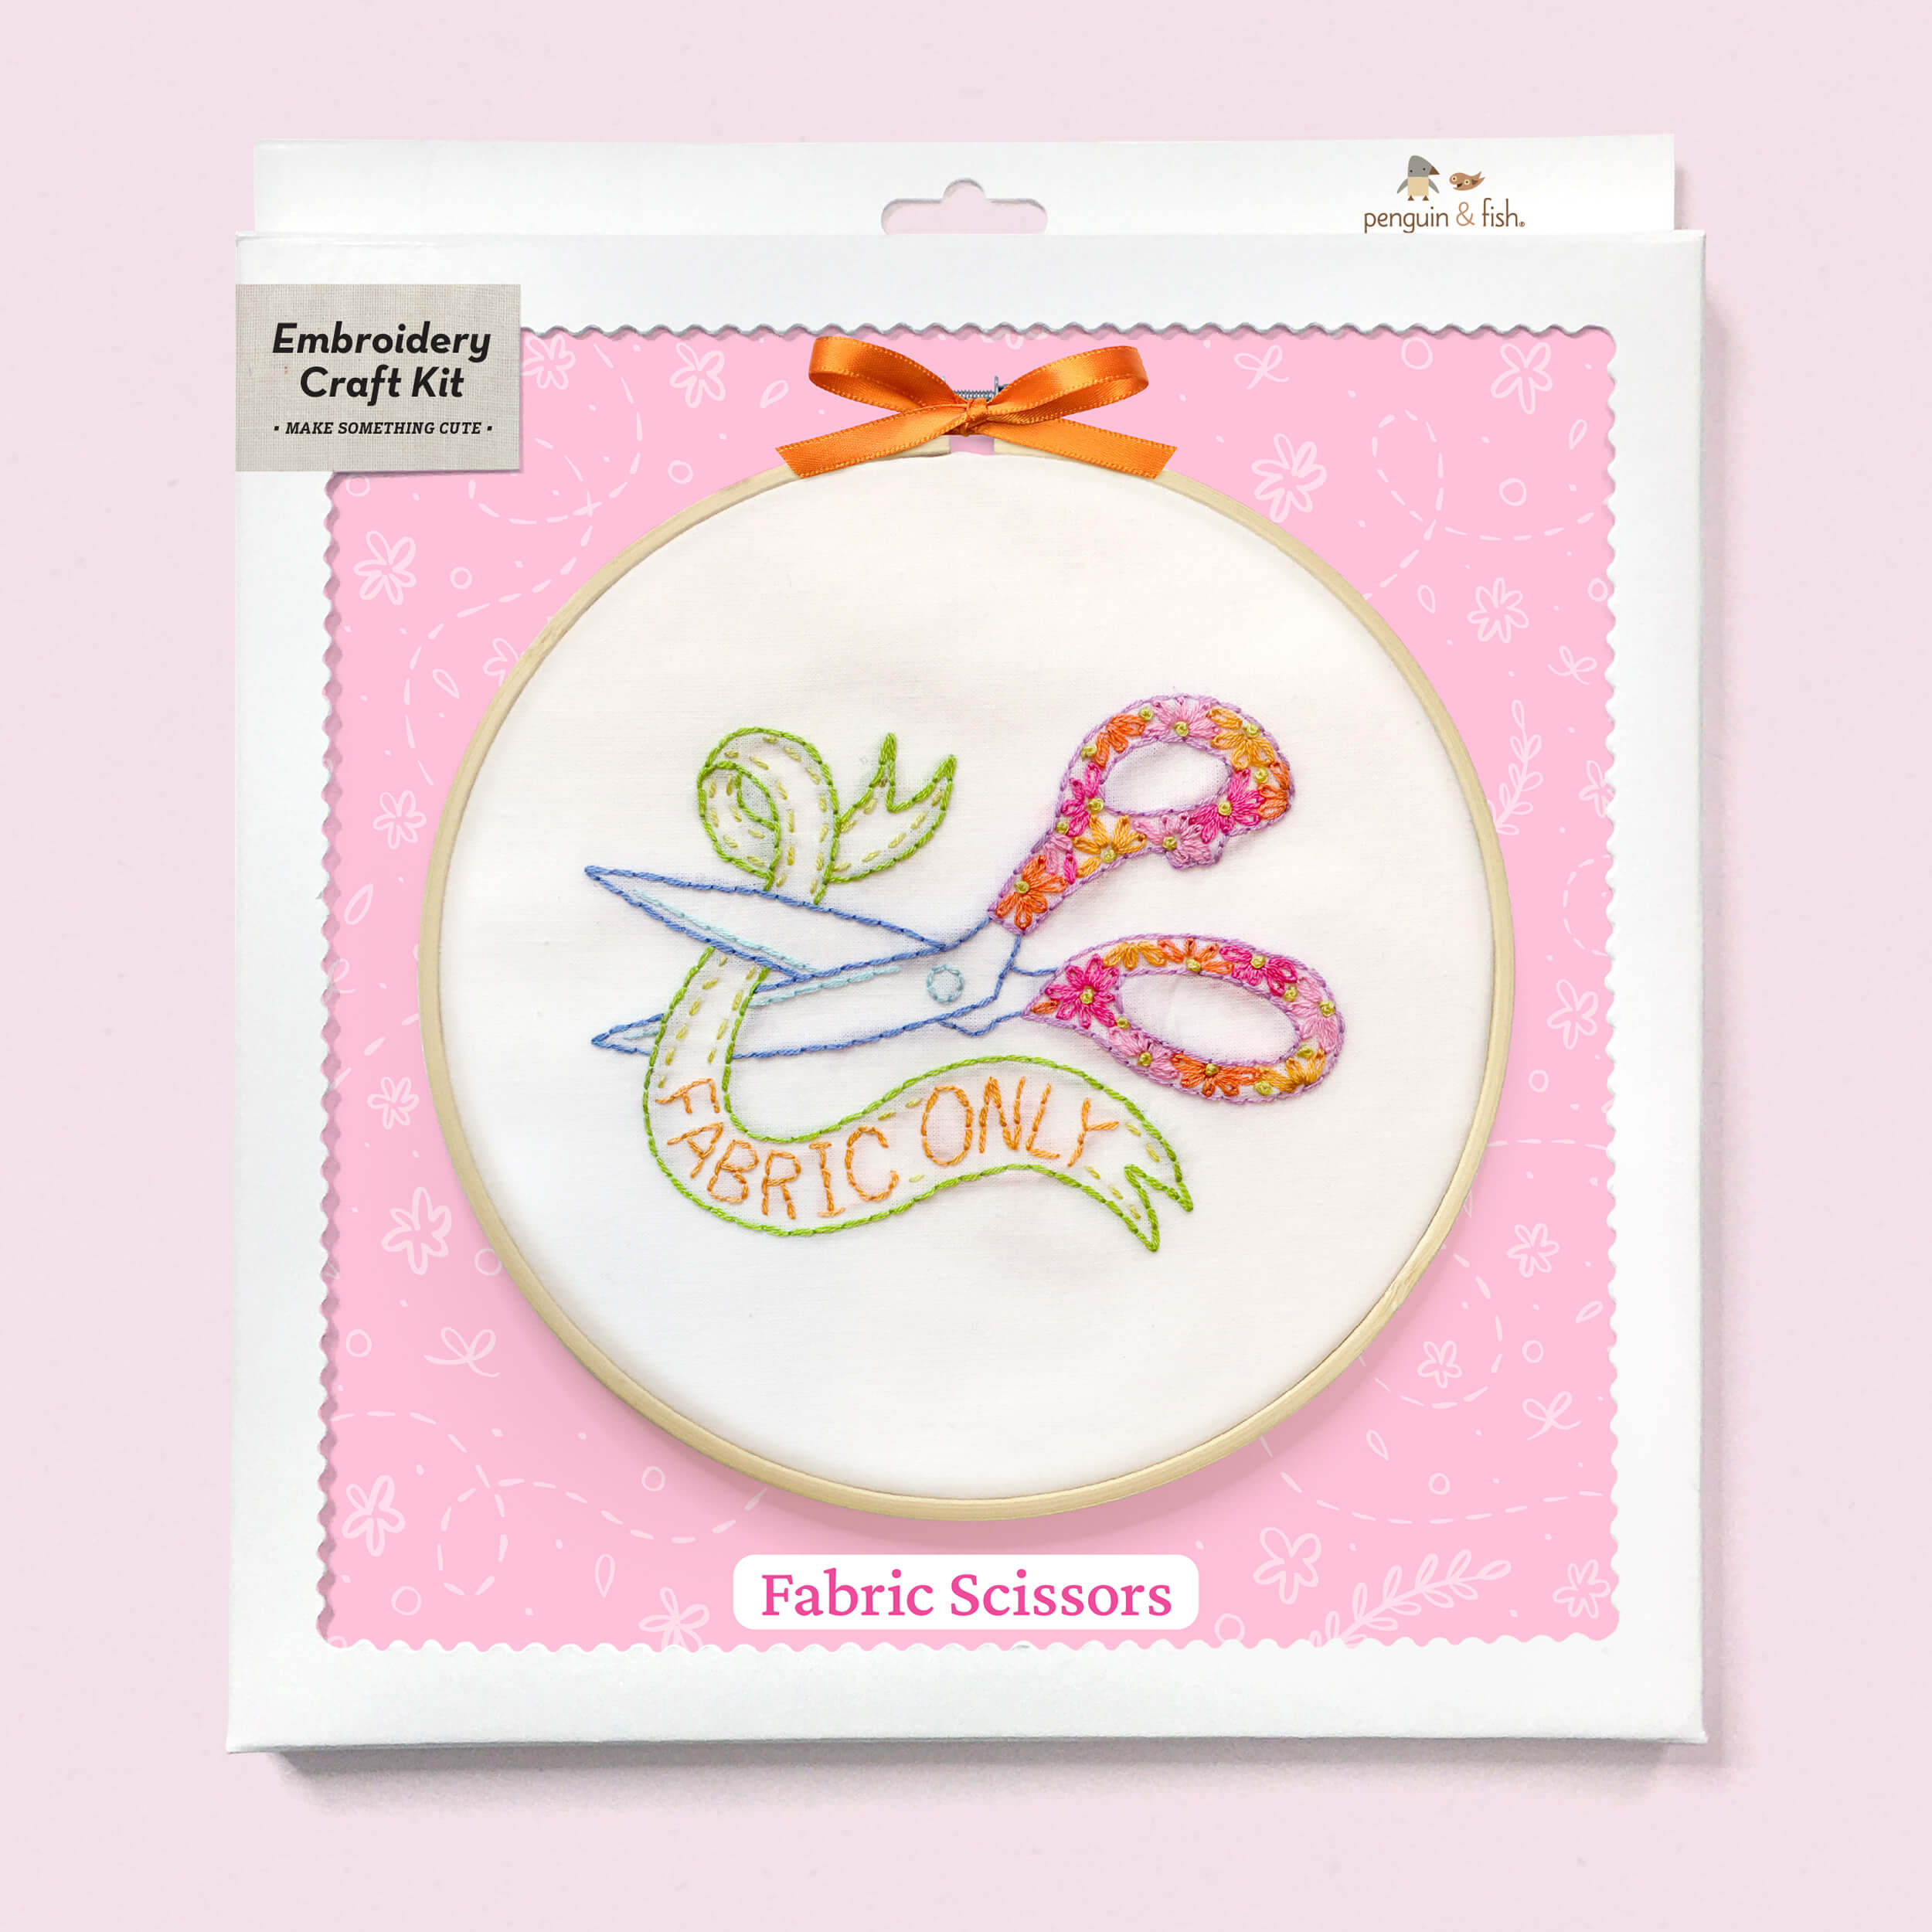 Fabric Scissors embroidery kits in a box